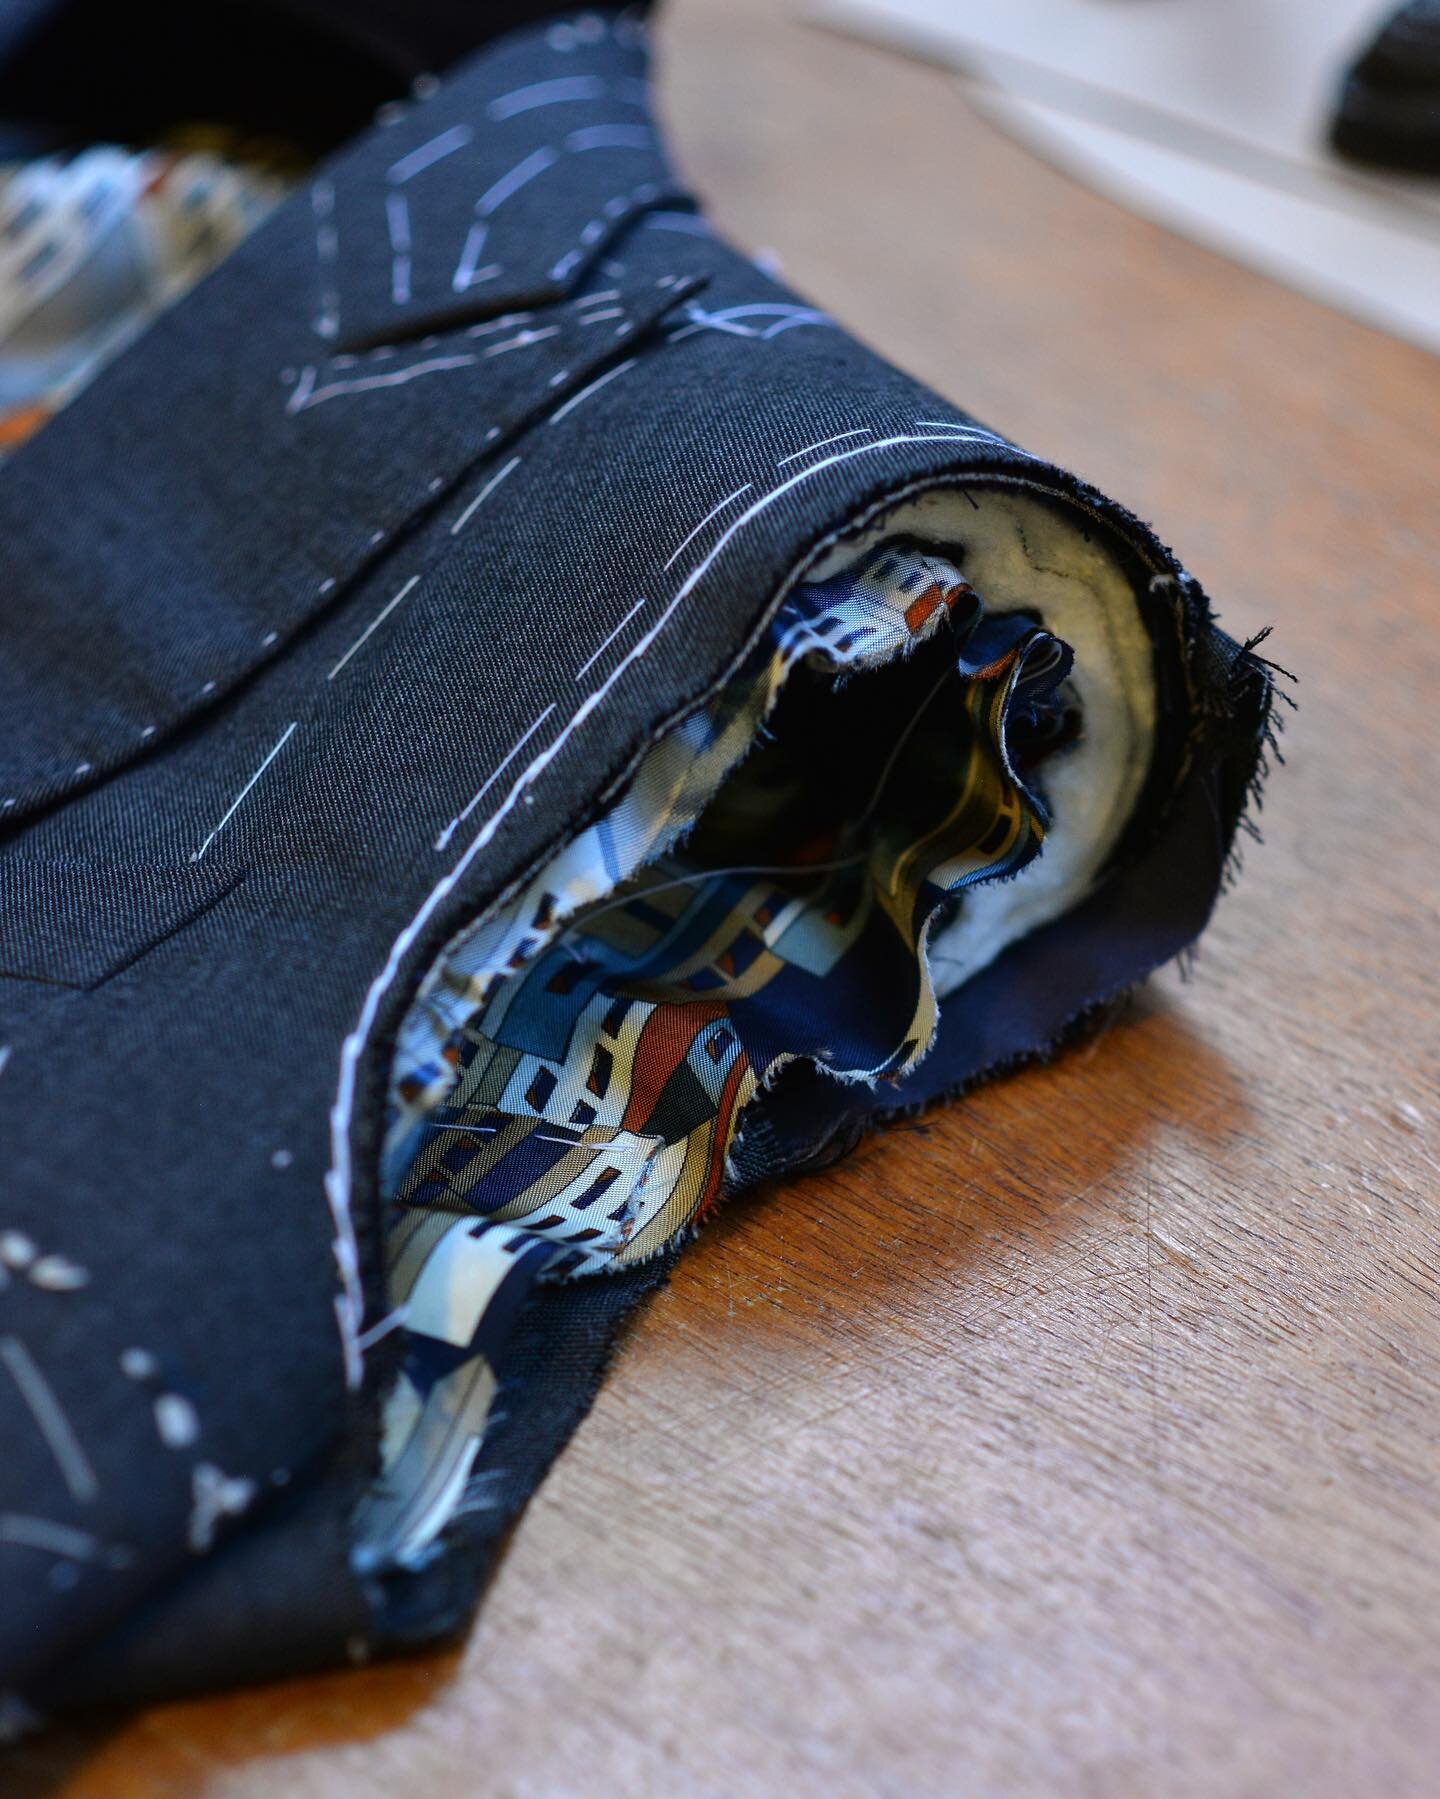 The armhole of our suit jacket, shaped and prepared for the sleeve to be set in and finished . Our handmade shoulder pad and a fancy lining visible within